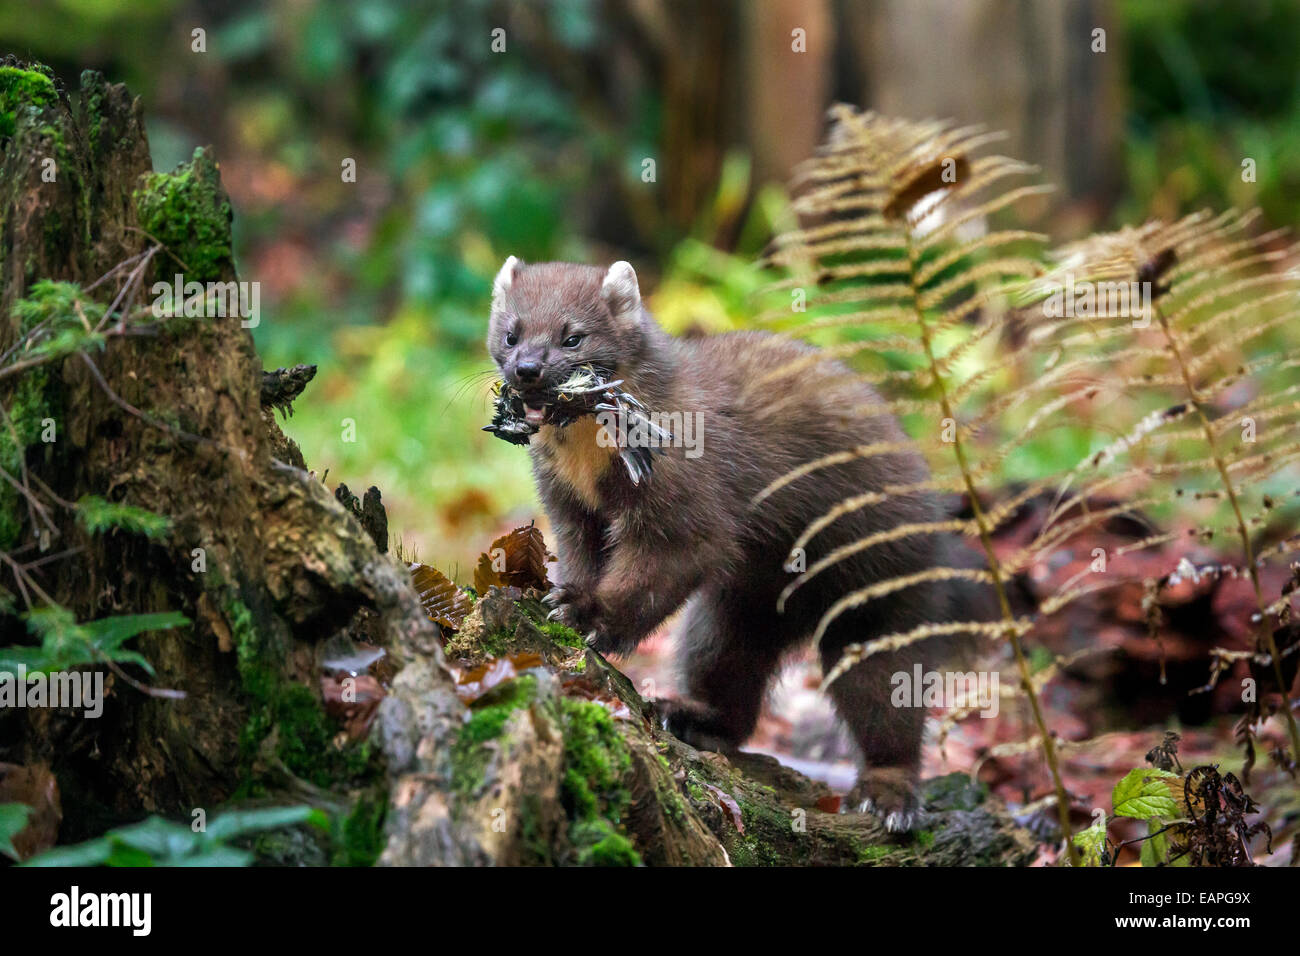 European pine marten (Martes martes) with caught songbird prey in mouth in forest Stock Photo